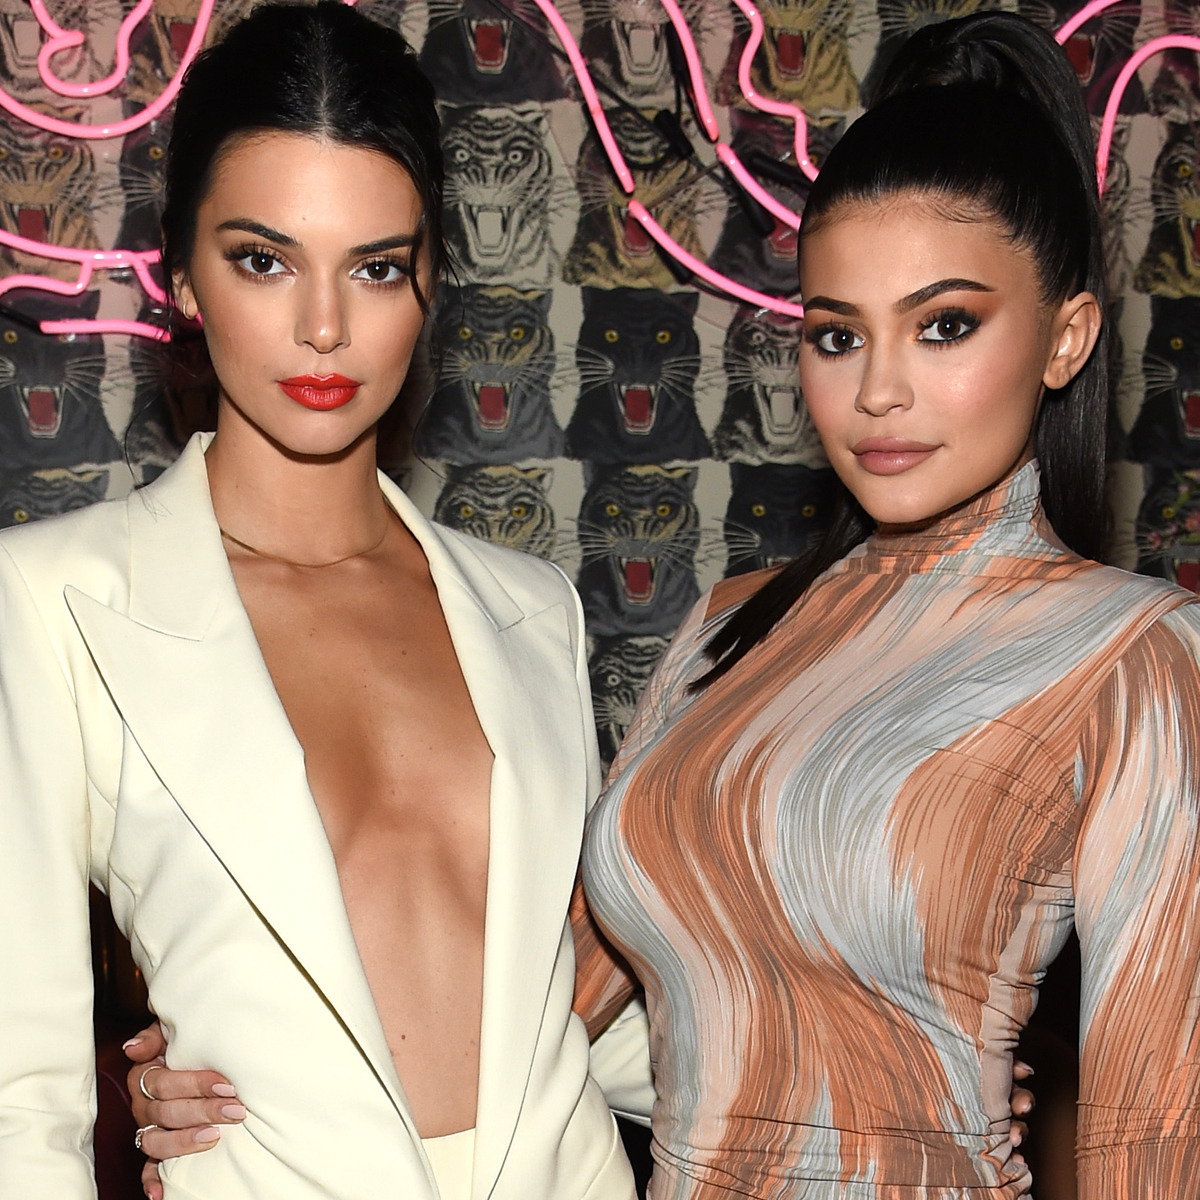 Kylie Jenner wore a lingerie-inspired conical bra and corset look